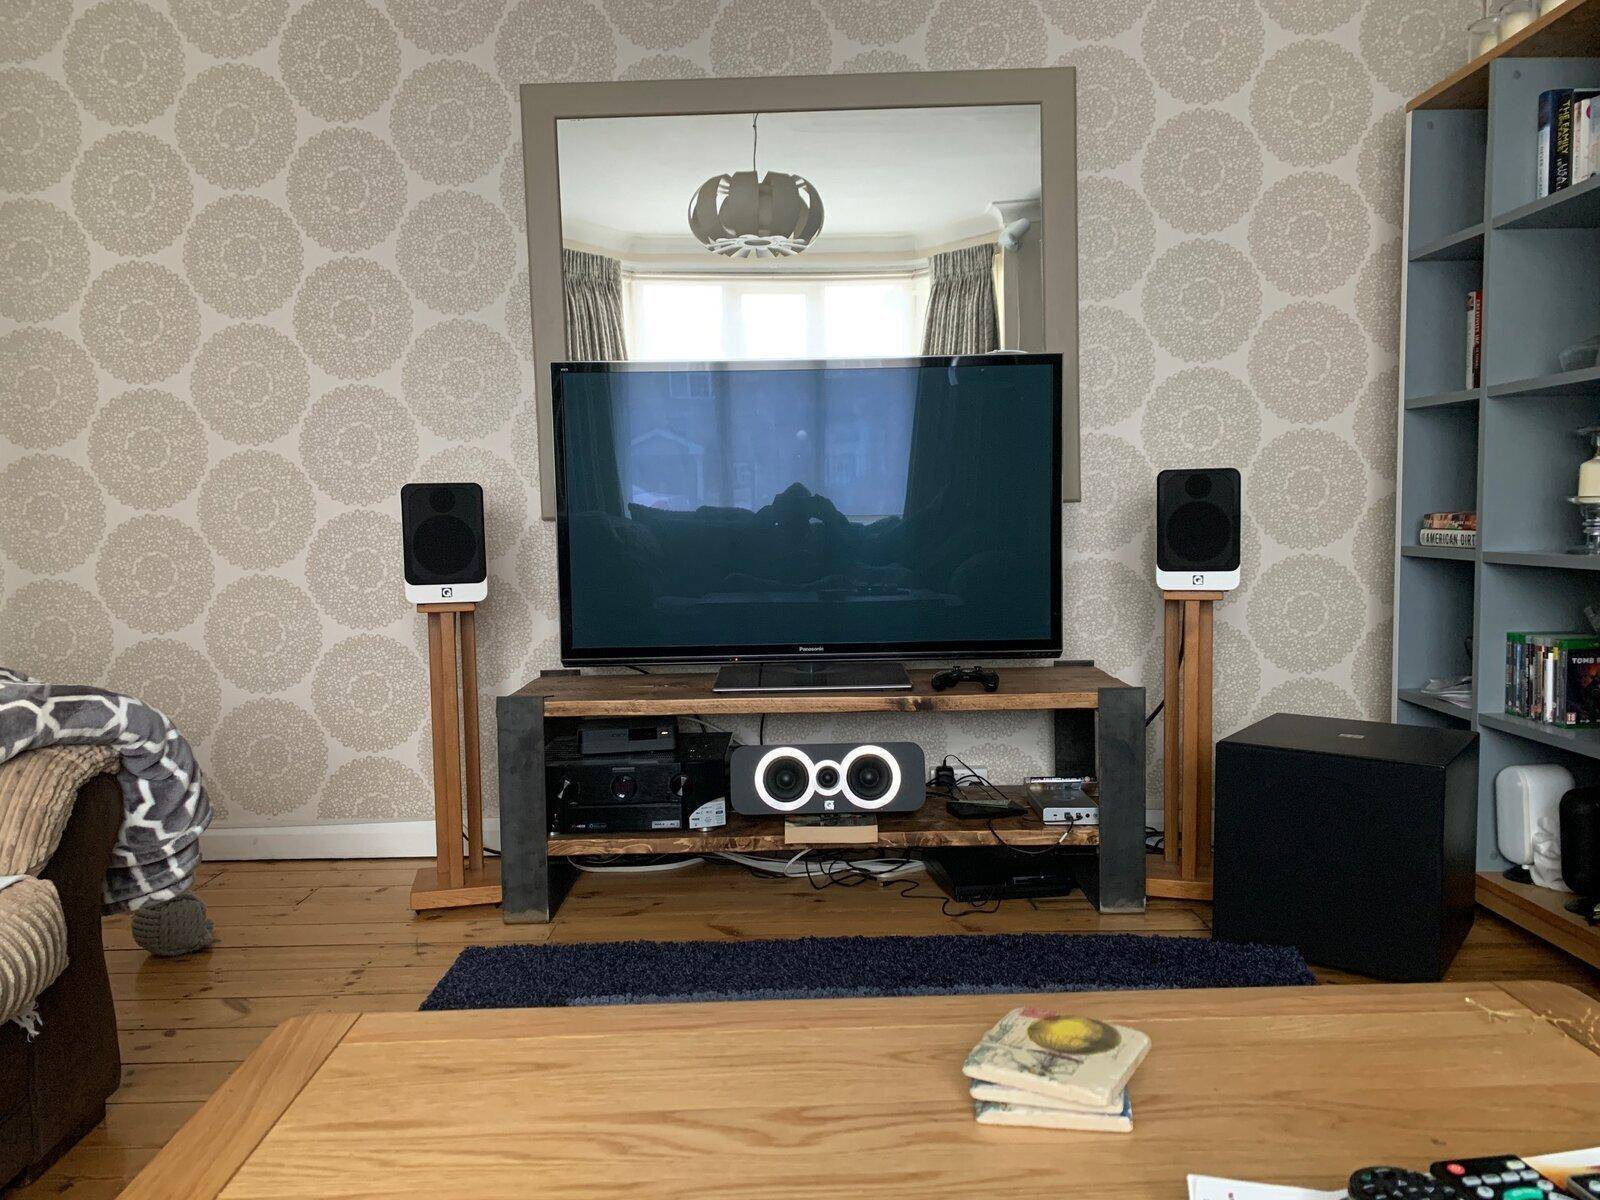 The focal point of your Home Cinema arrangement